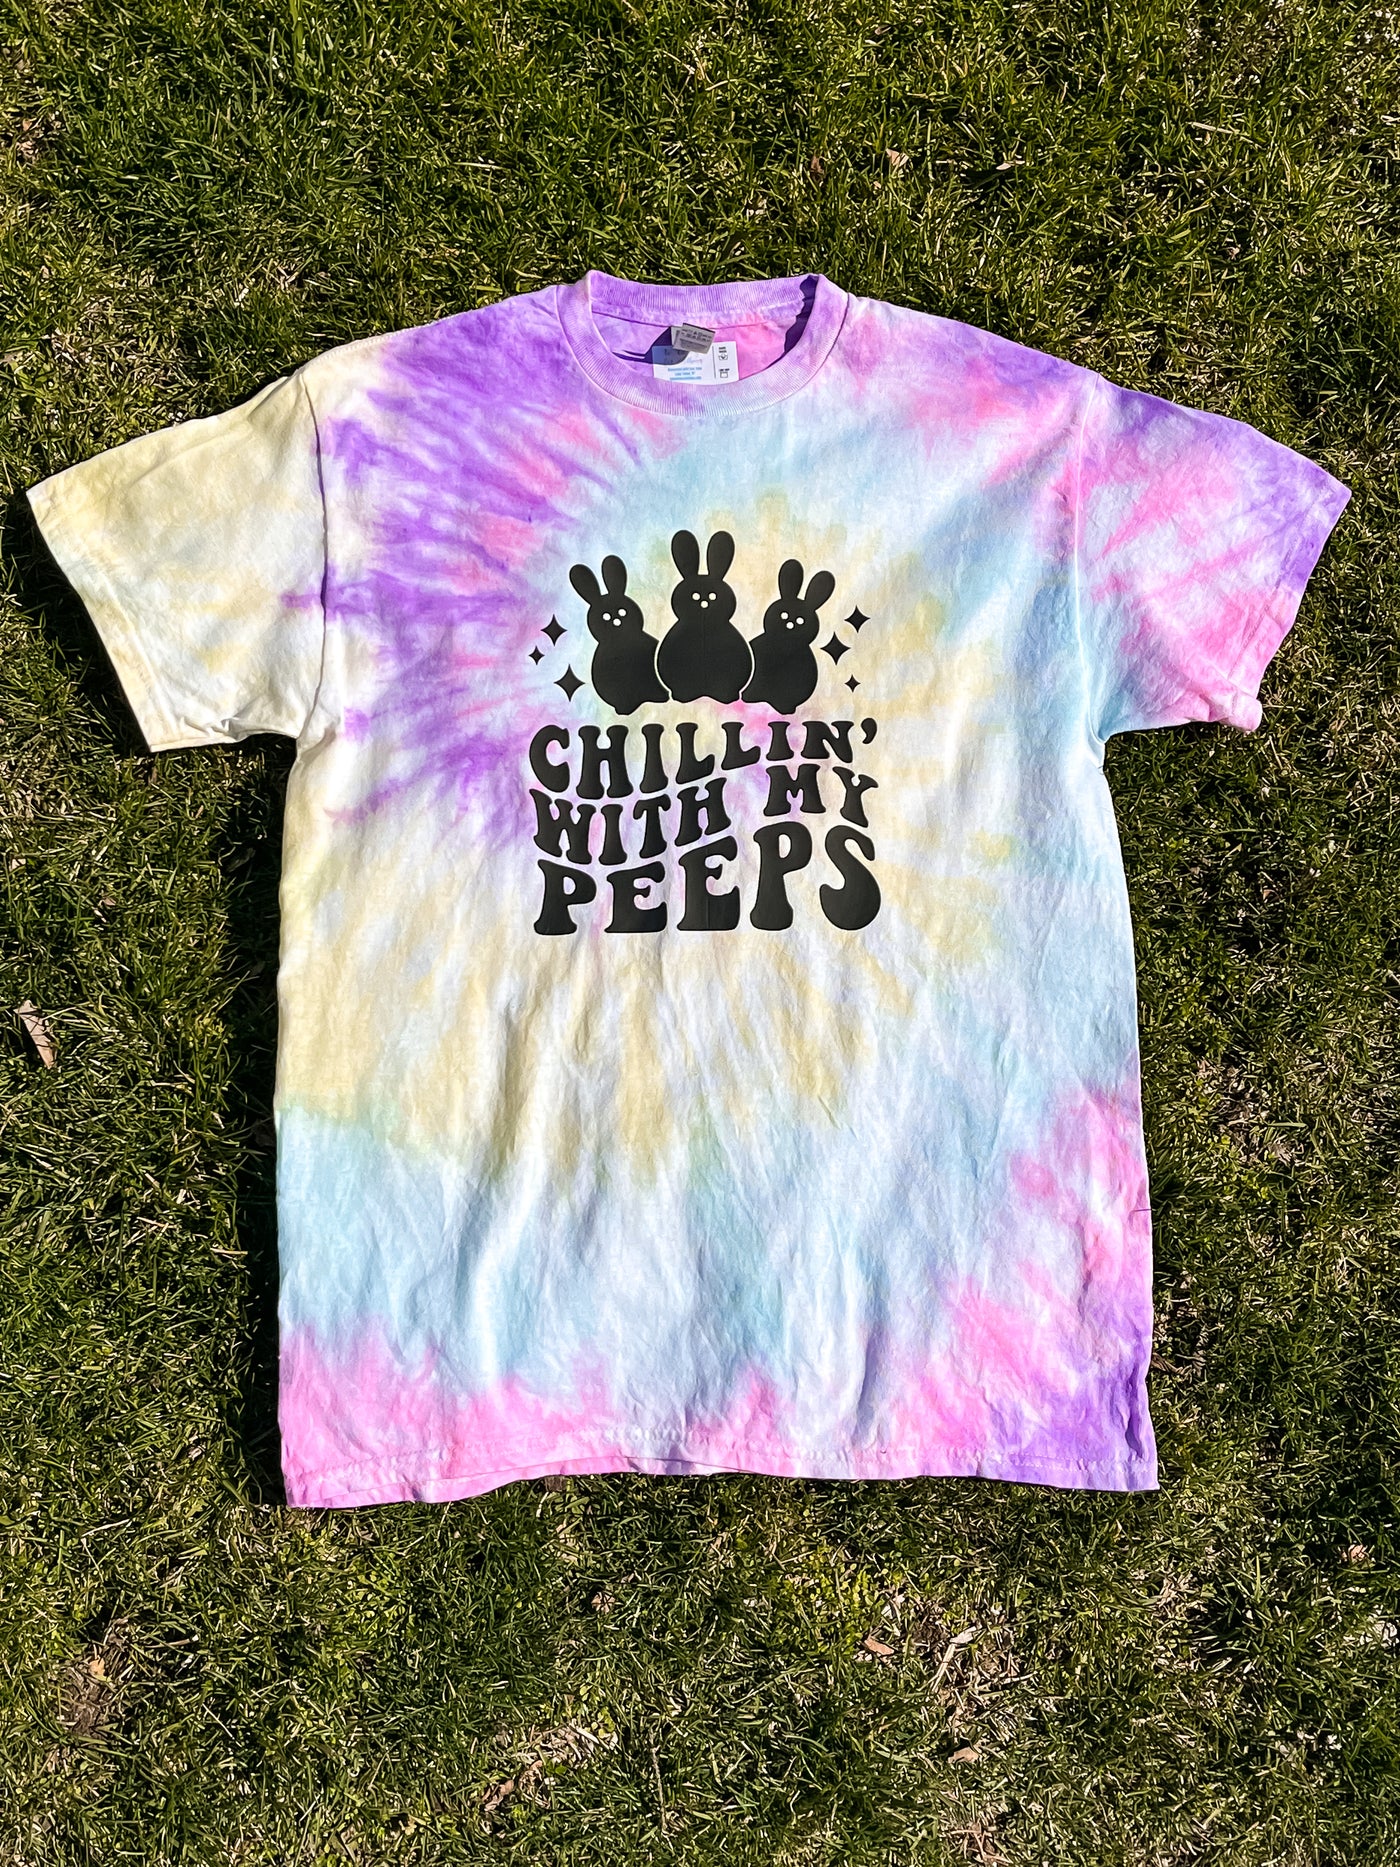 Adult Tie-Dye Short Sleeve Shirt - Chillin' with my Peeps